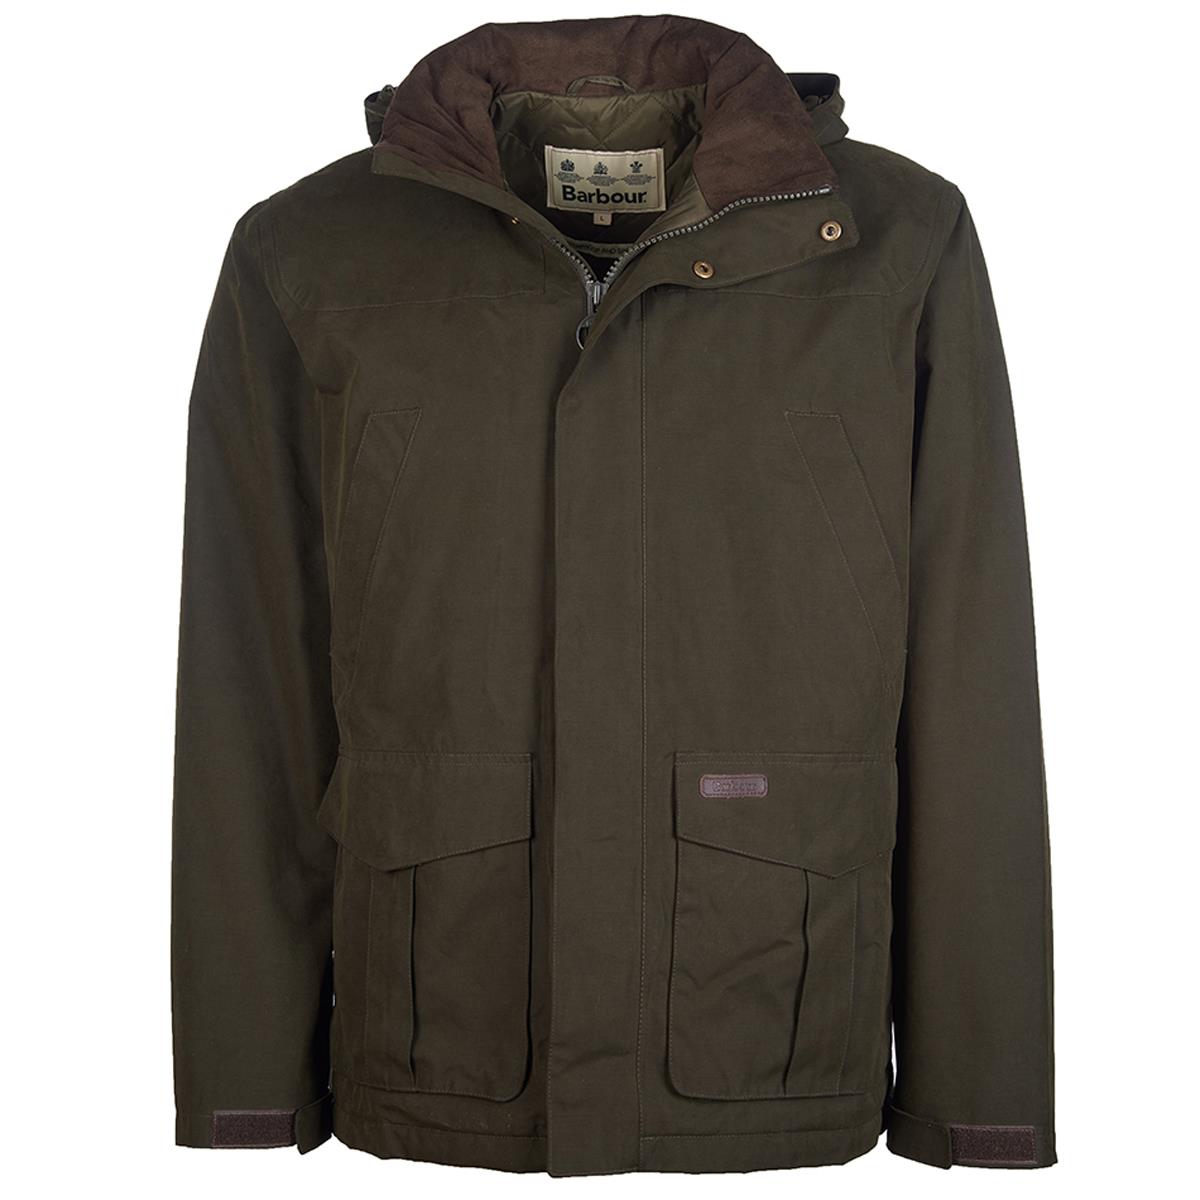 What is the reference number for the Barbour Brockstone Jacket?